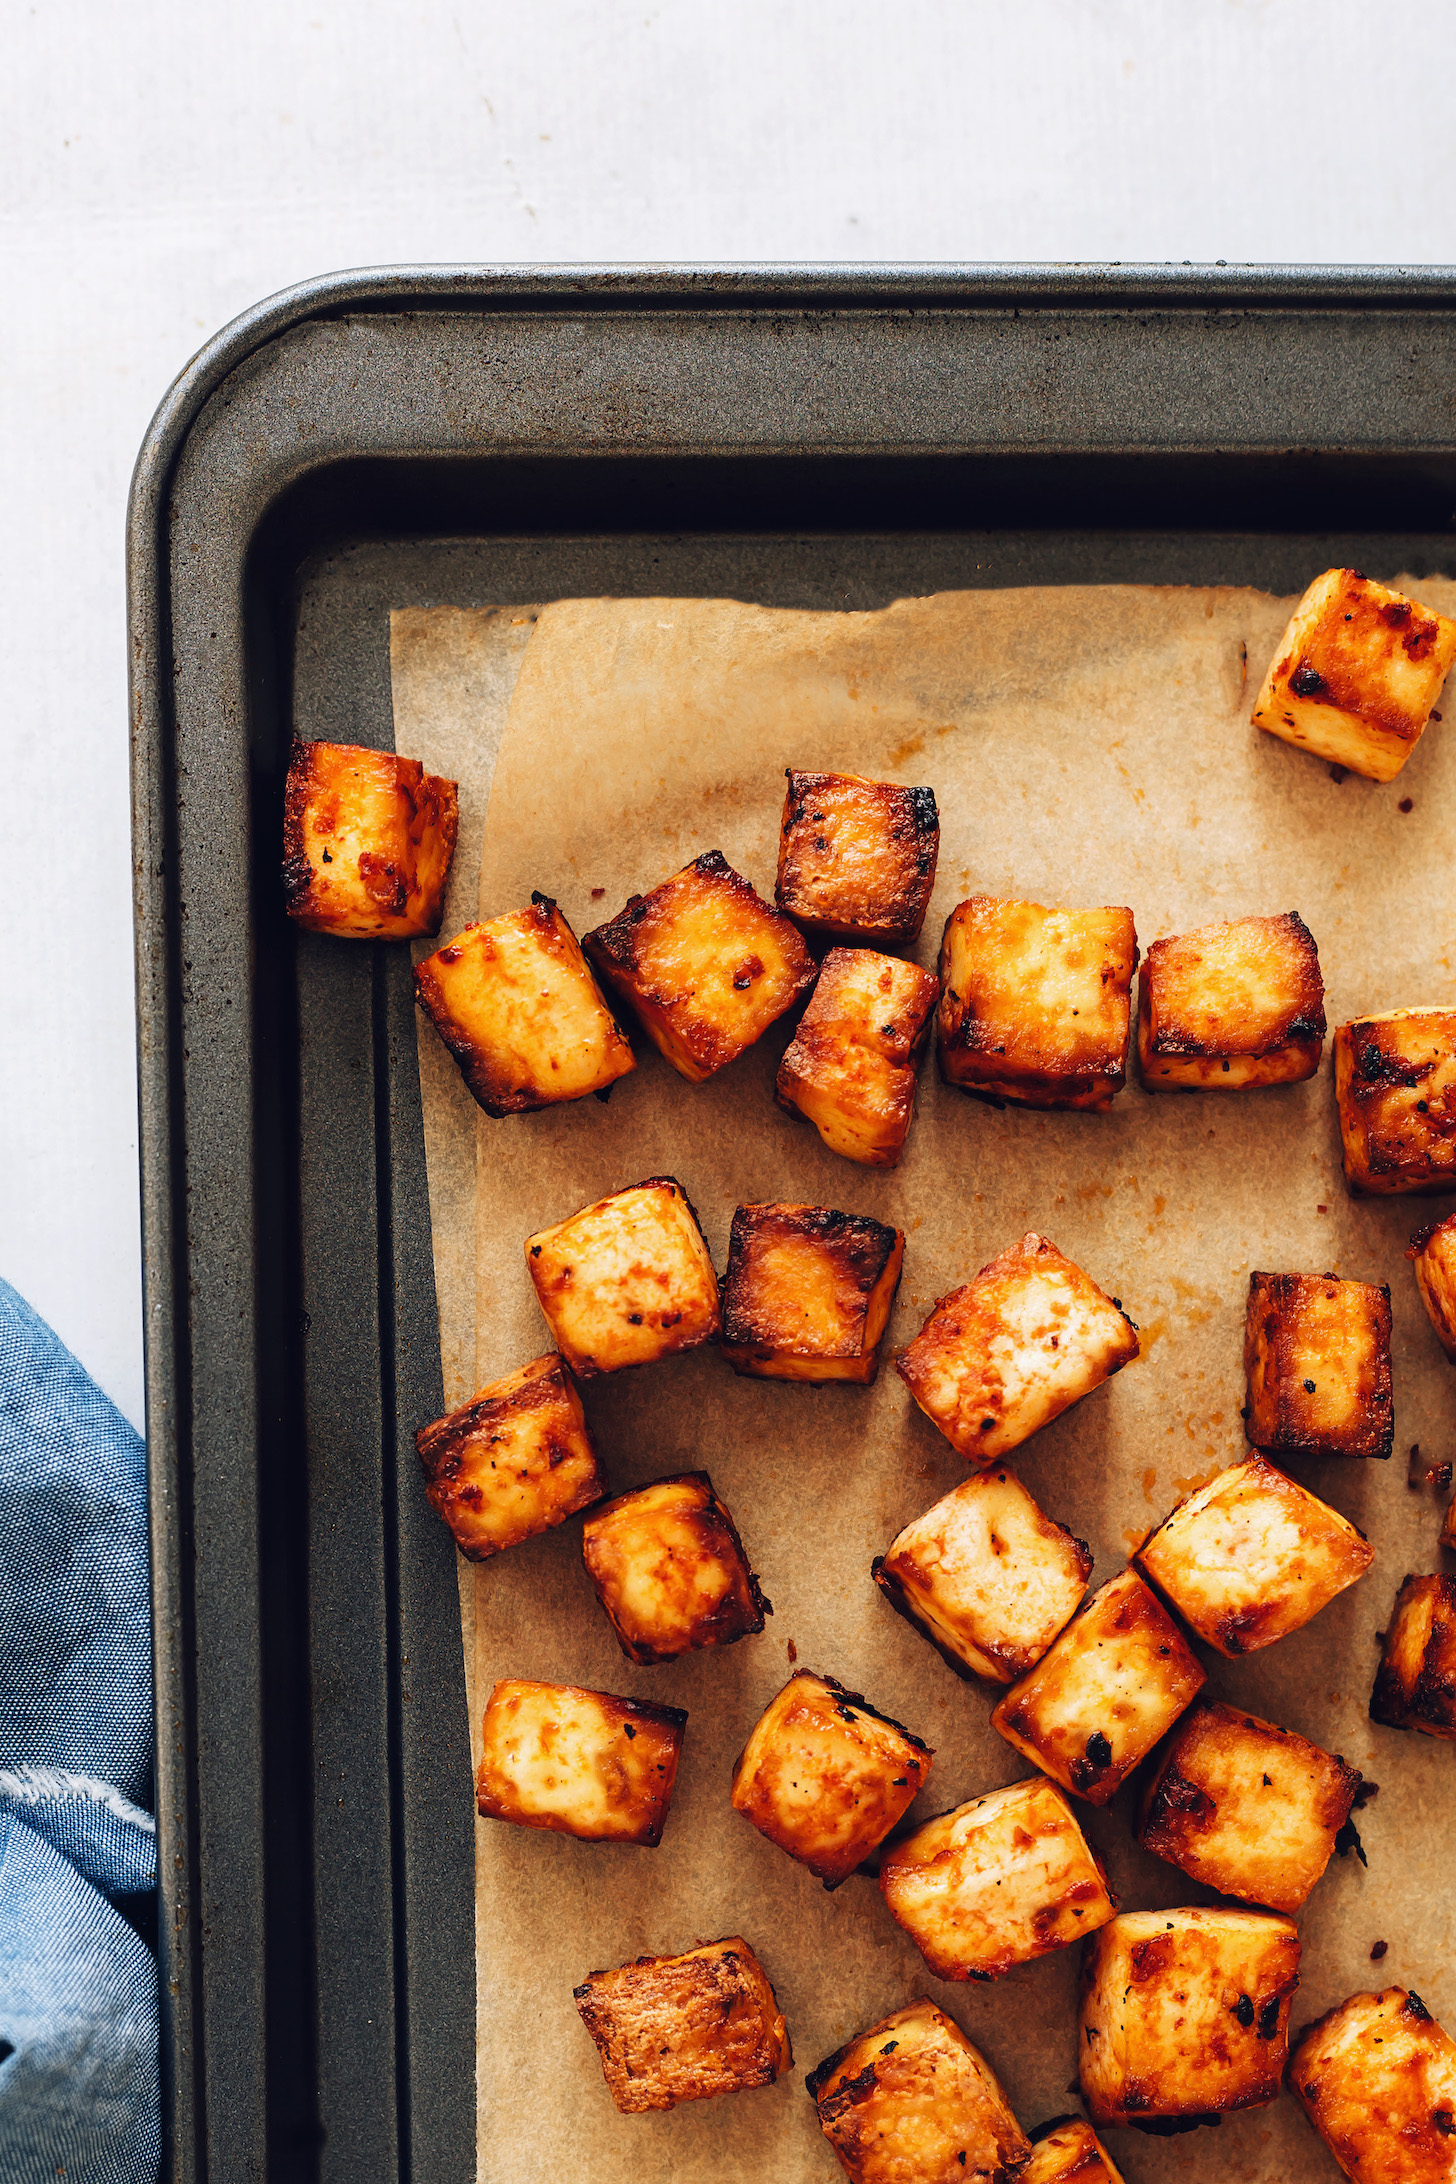 Cubed baked tofu on a parchment-lined baking sheet